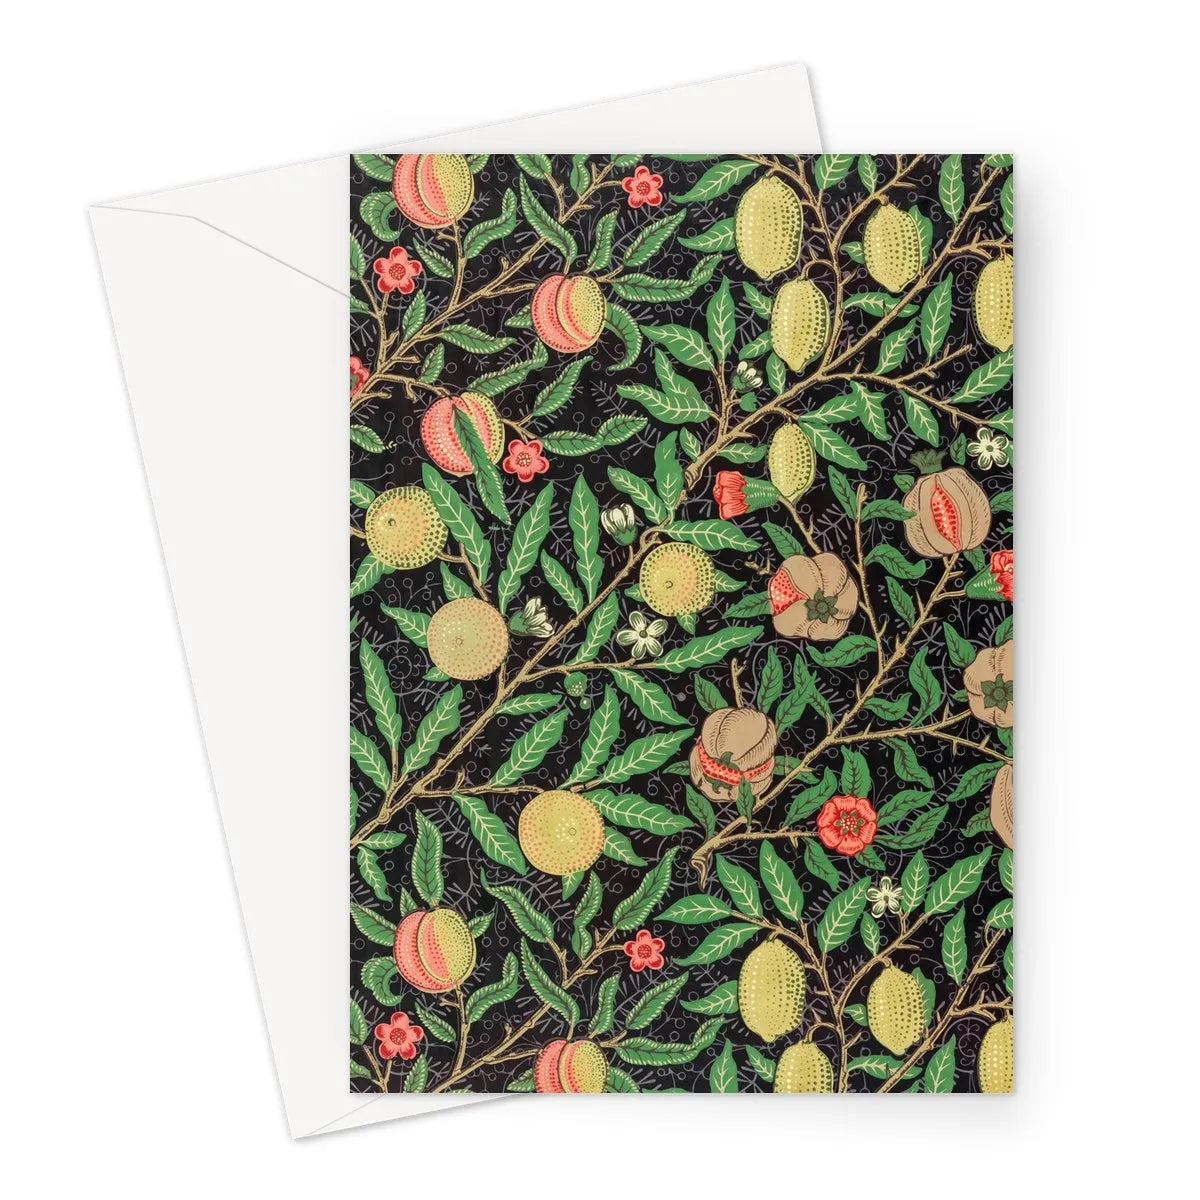 Four Fruits Too By William Morris Greeting Card - A5 Portrait / 10 Cards - Greeting & Note Cards - Aesthetic Art